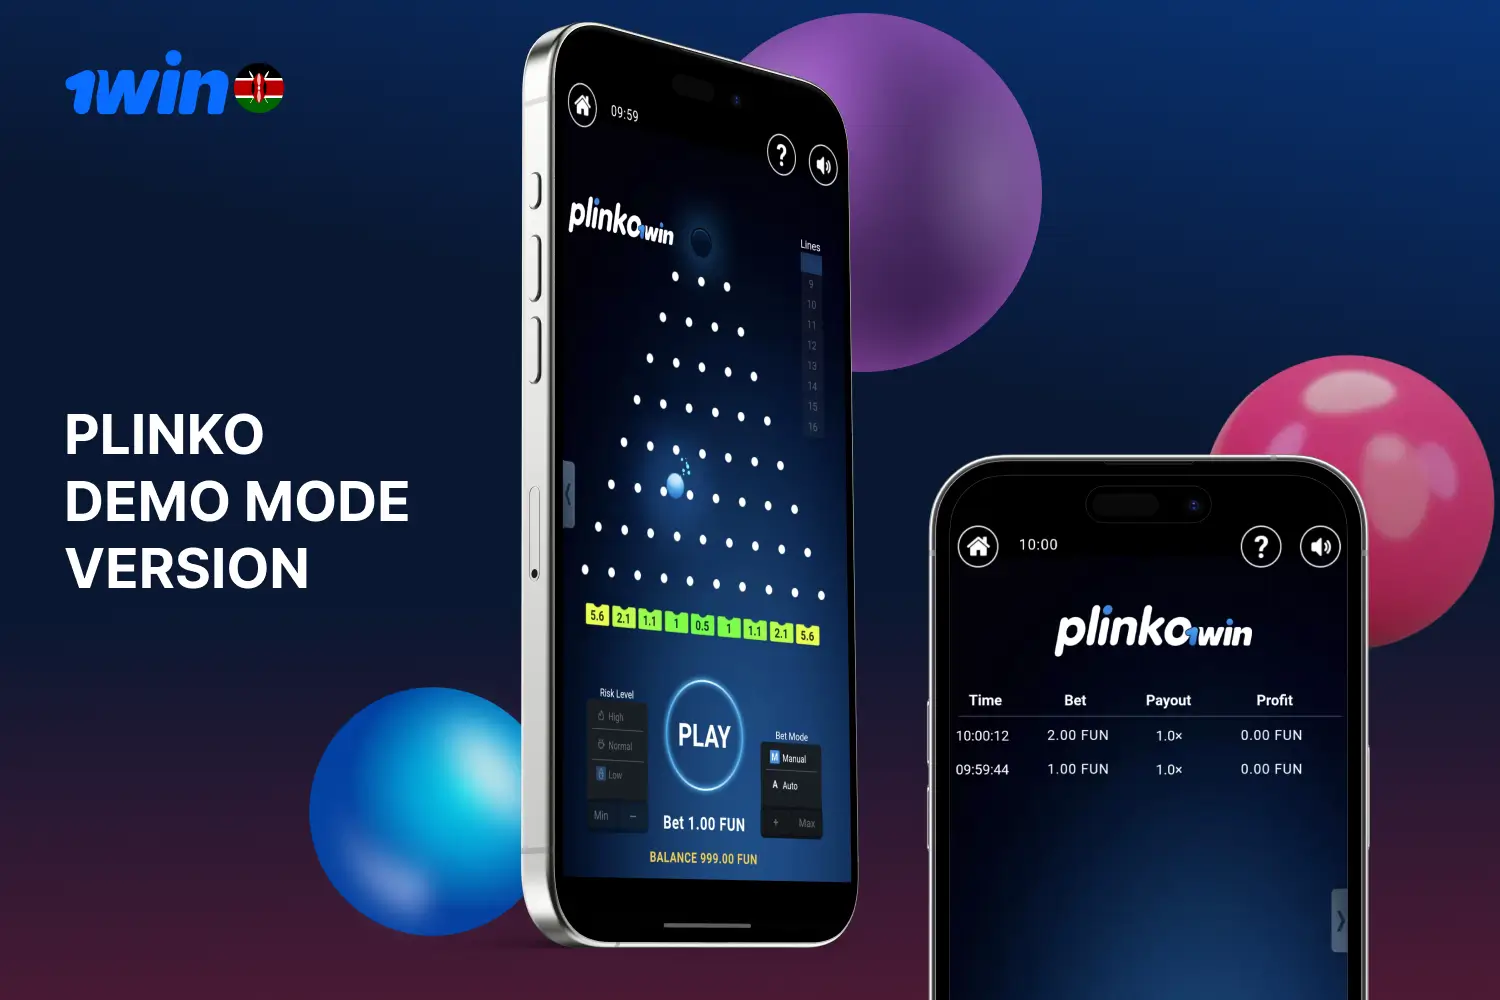 Kenyan users can experience all the benefits of playing plinko in demo mode